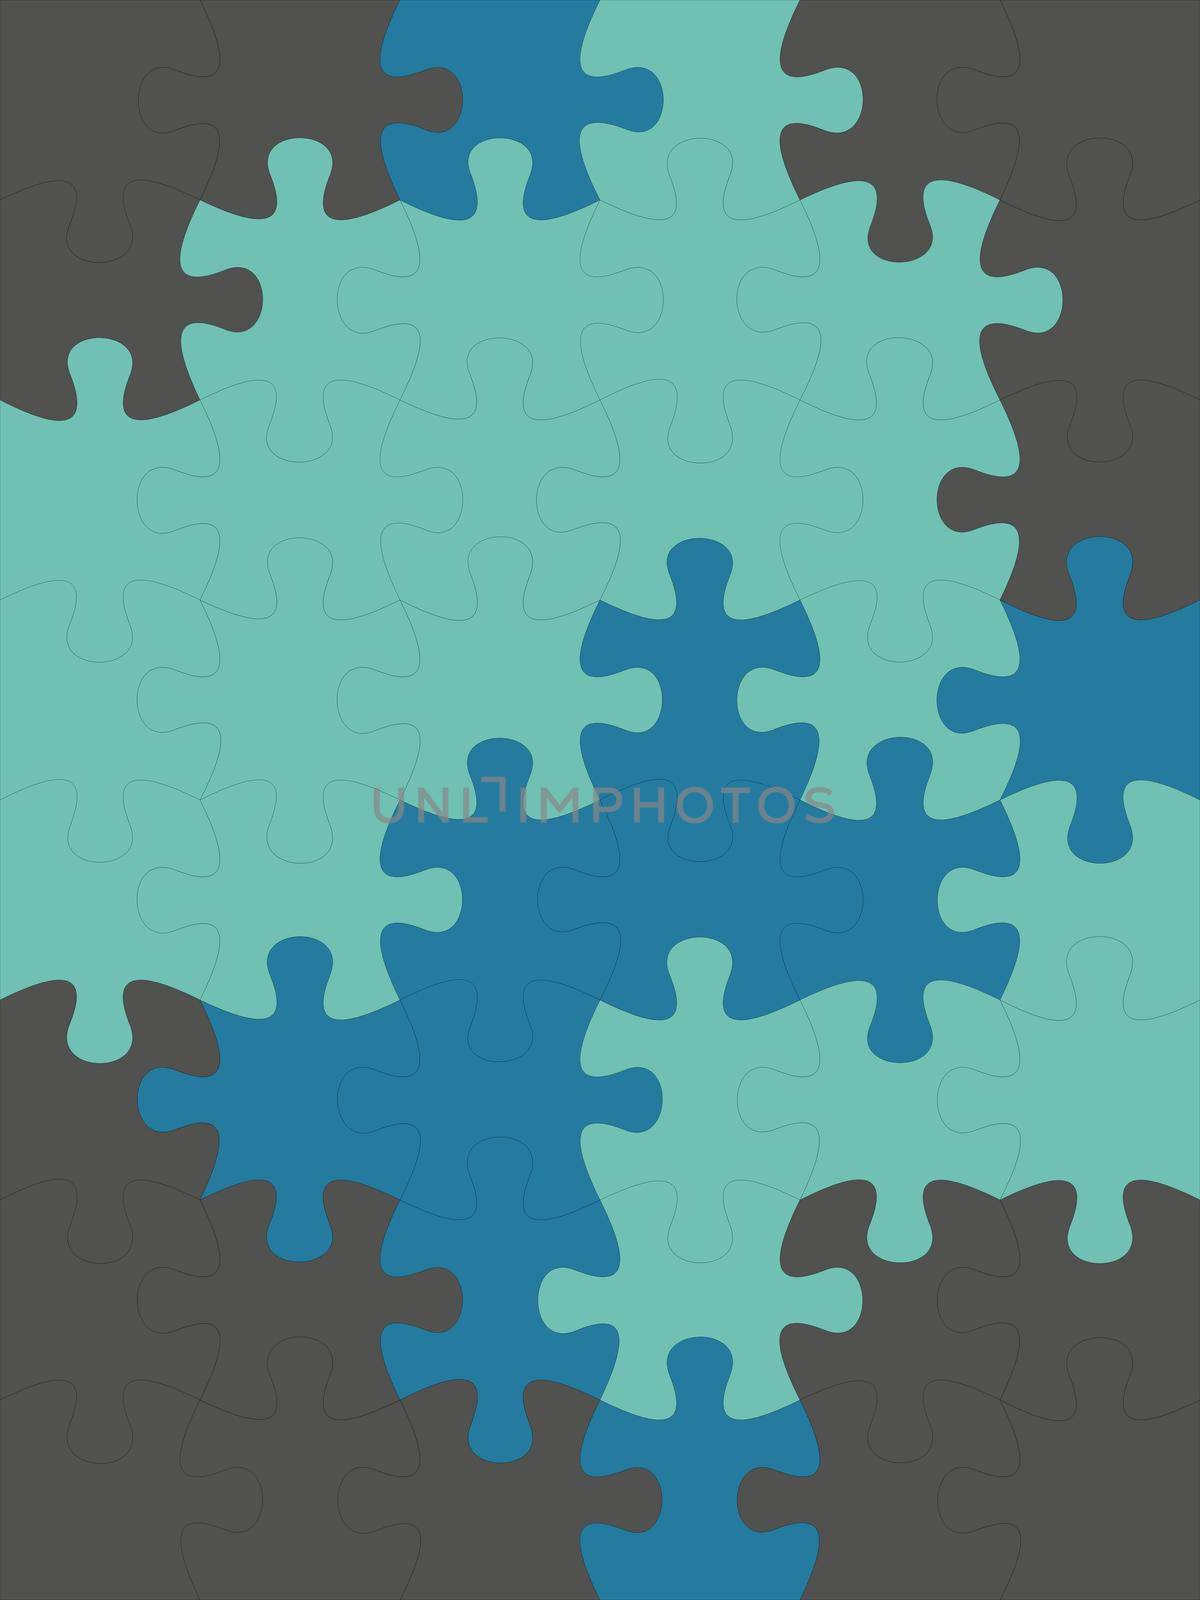 Different shades of blue color jigsaw puzzles designs on solid sheet of wallpaper. Concept of home decor and interior designing